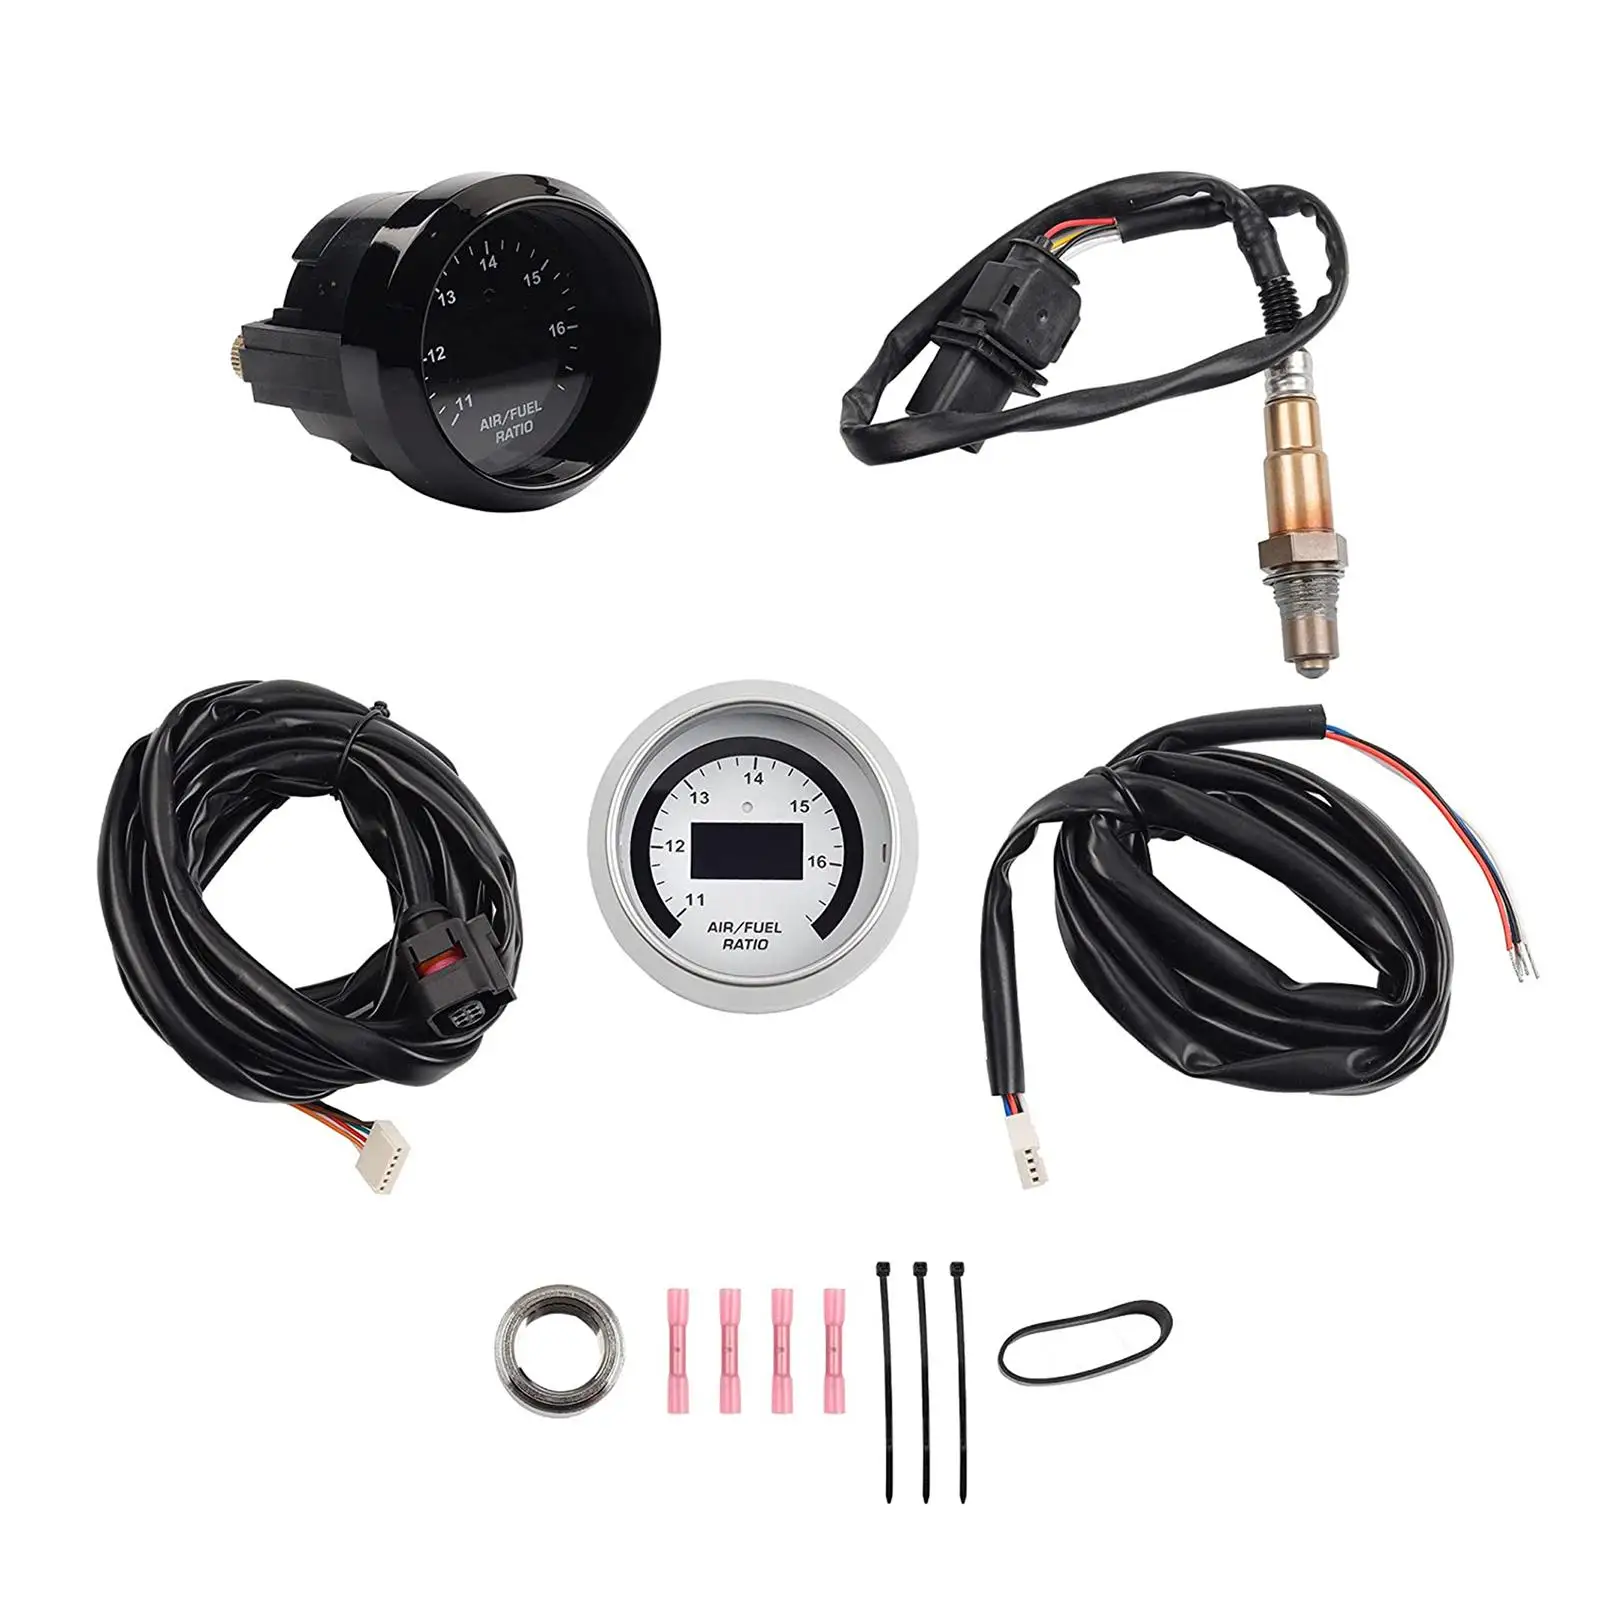 30-4110 Easy to Read with 4.9 Sensor Replaces Easy to Install Data Logging Durable Air Fuel Ratio Gauge Controller Gauge Set